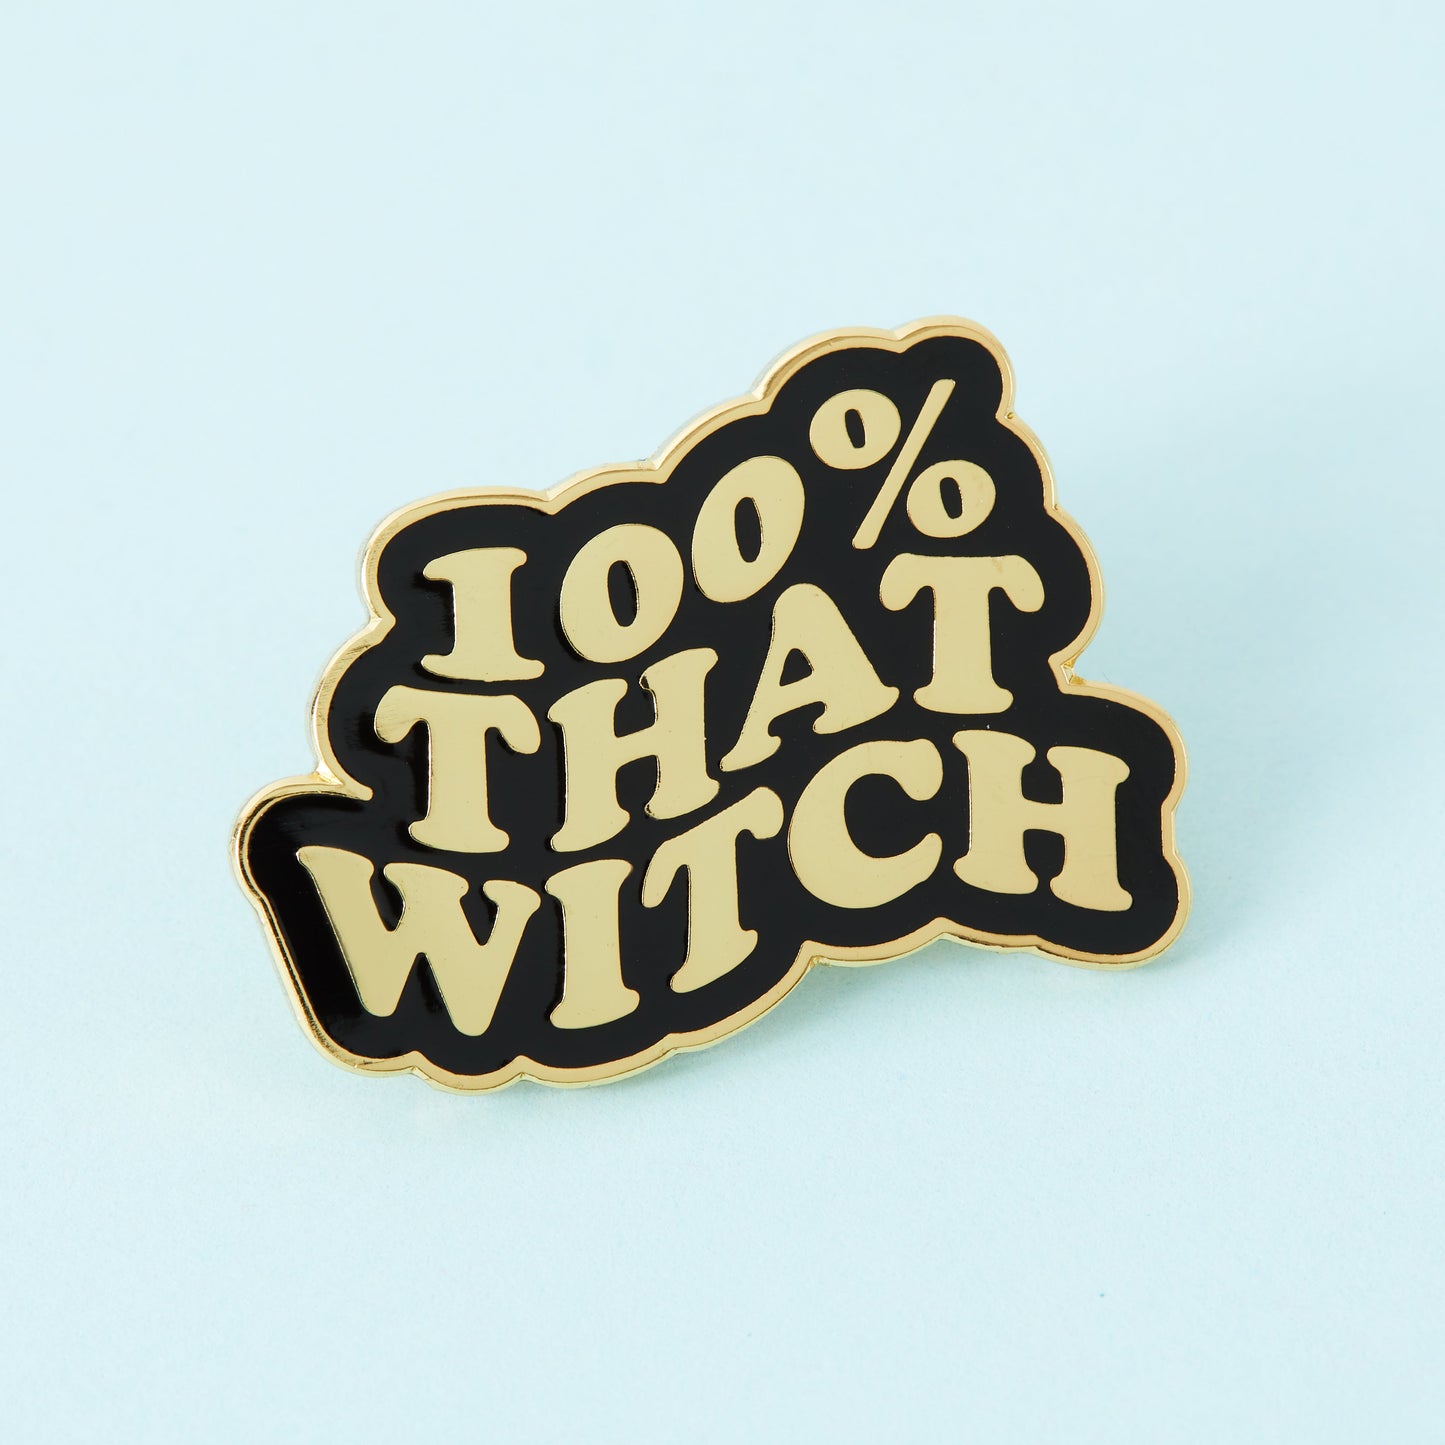 Pins - 100% that witch